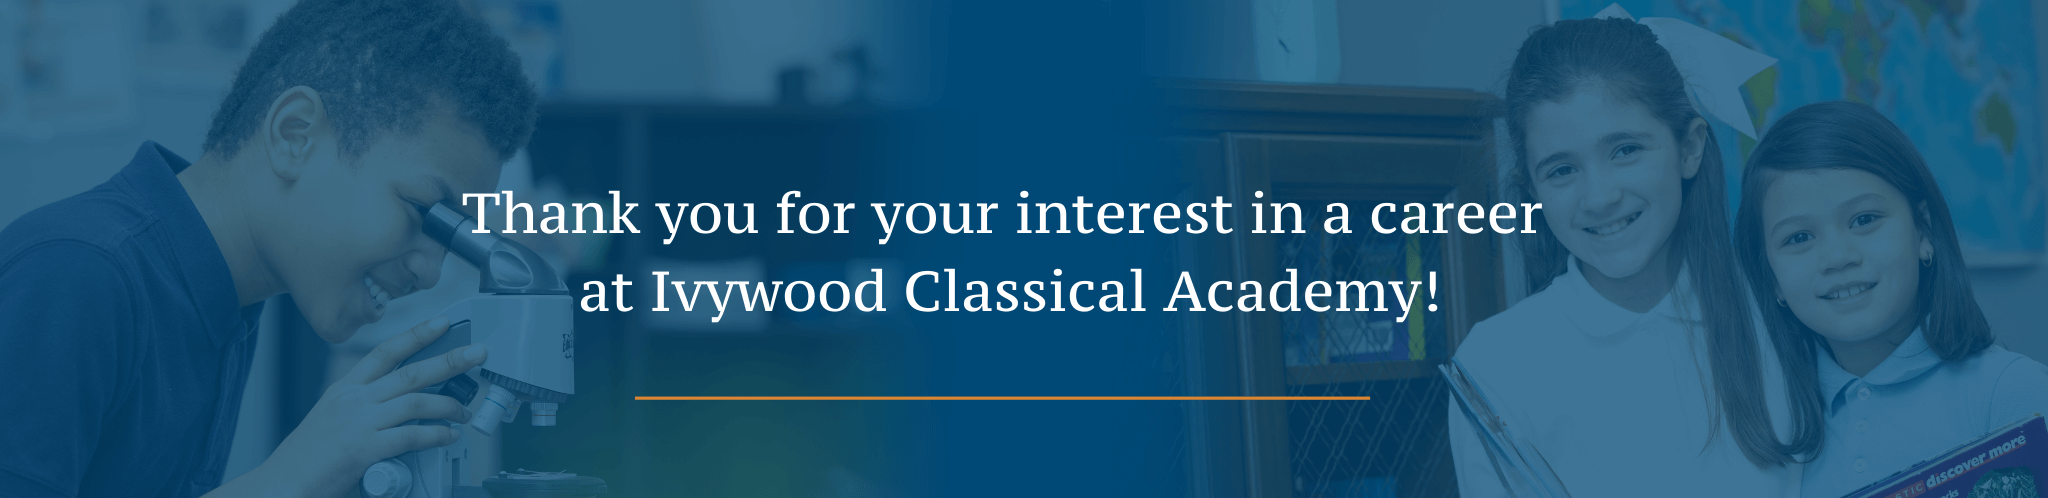 Thank you for your interest in a career at Ivywood Classical Academy!